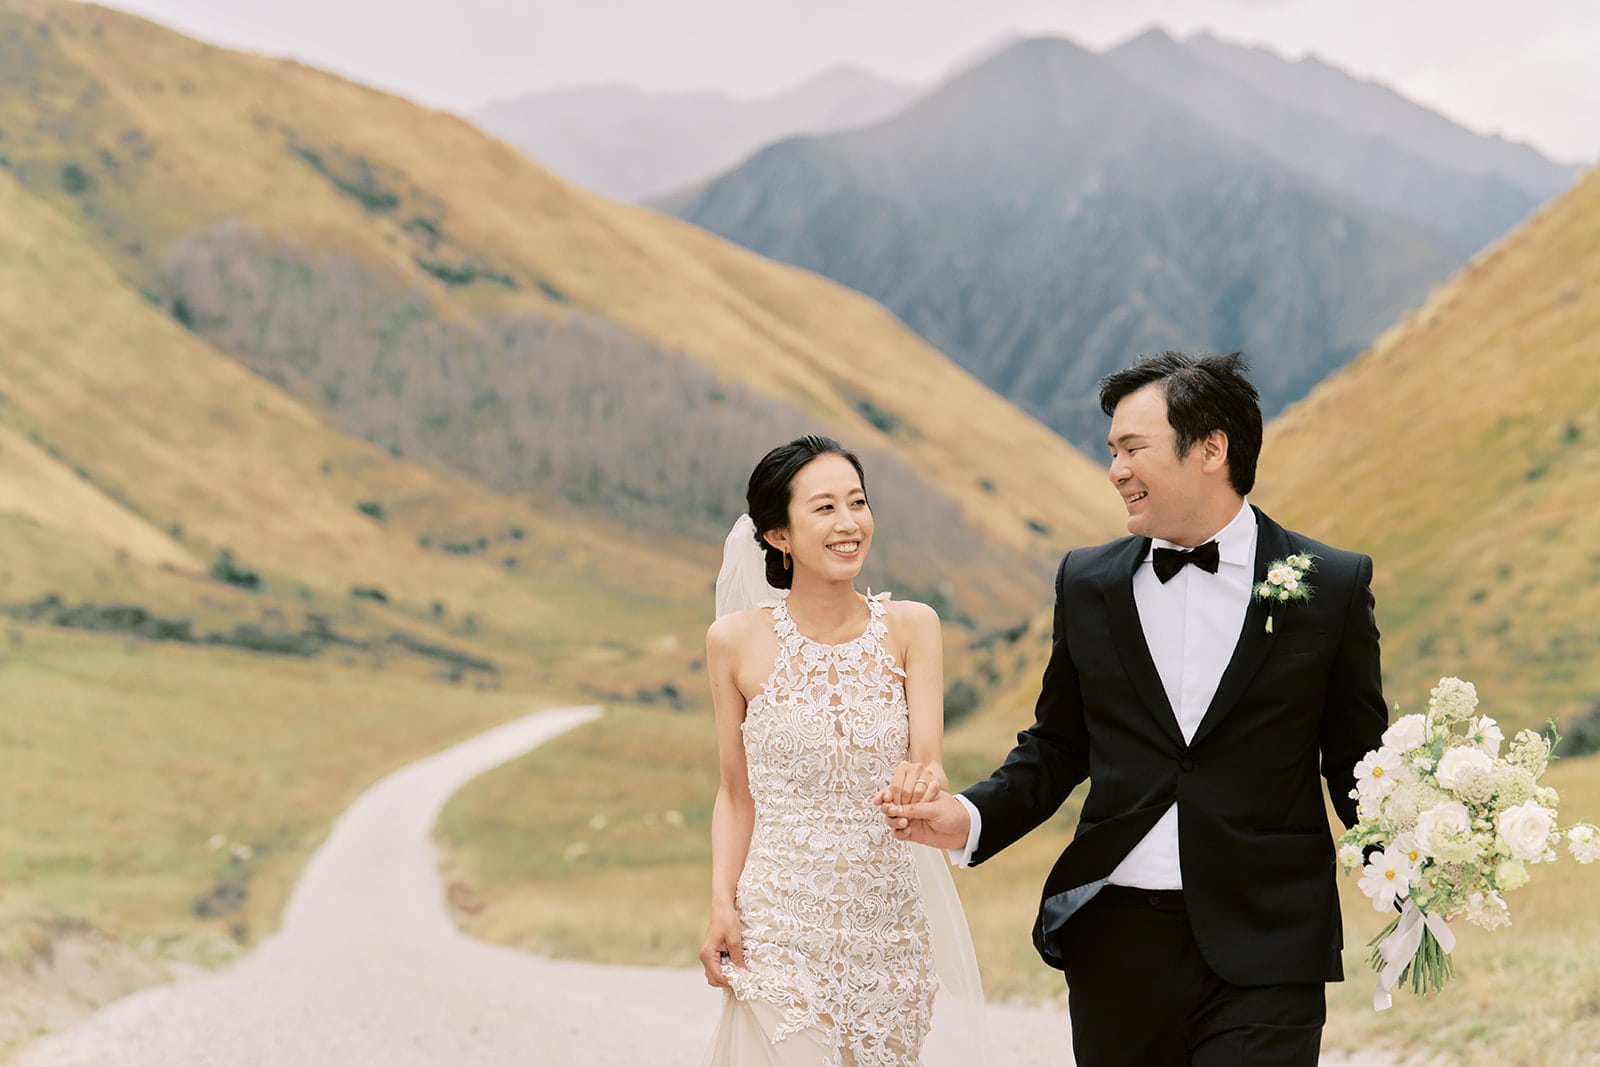 Queenstown New Zealand Heli Wedding Elopement Photographer クイーンズタウン　ニュージーランド　エロープメント 結婚式 | A couple in wedding attire smiling and holding hands while walking down a countryside road with mountains in the background, expertly captured by a Queenstown Wedding Photographer.